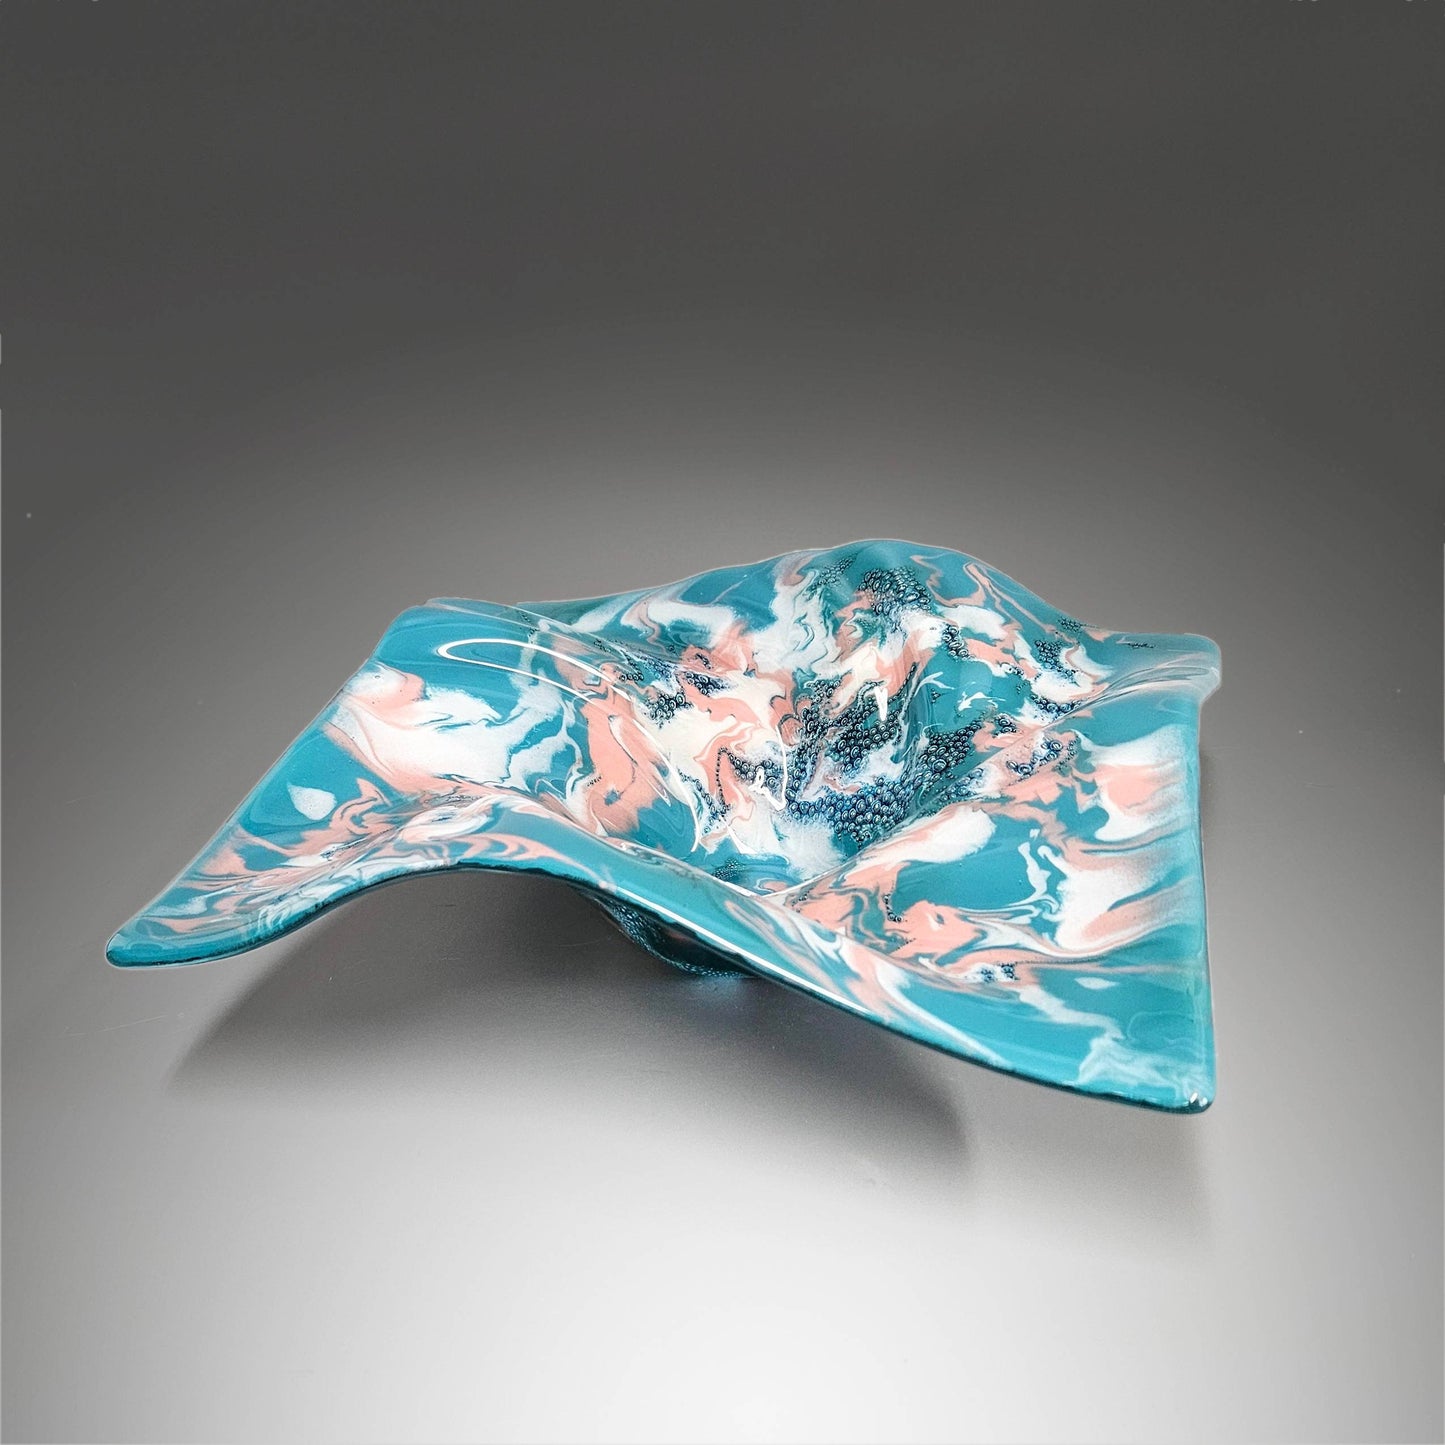 Glass Art Square Wave Bowl in Teal White Pink